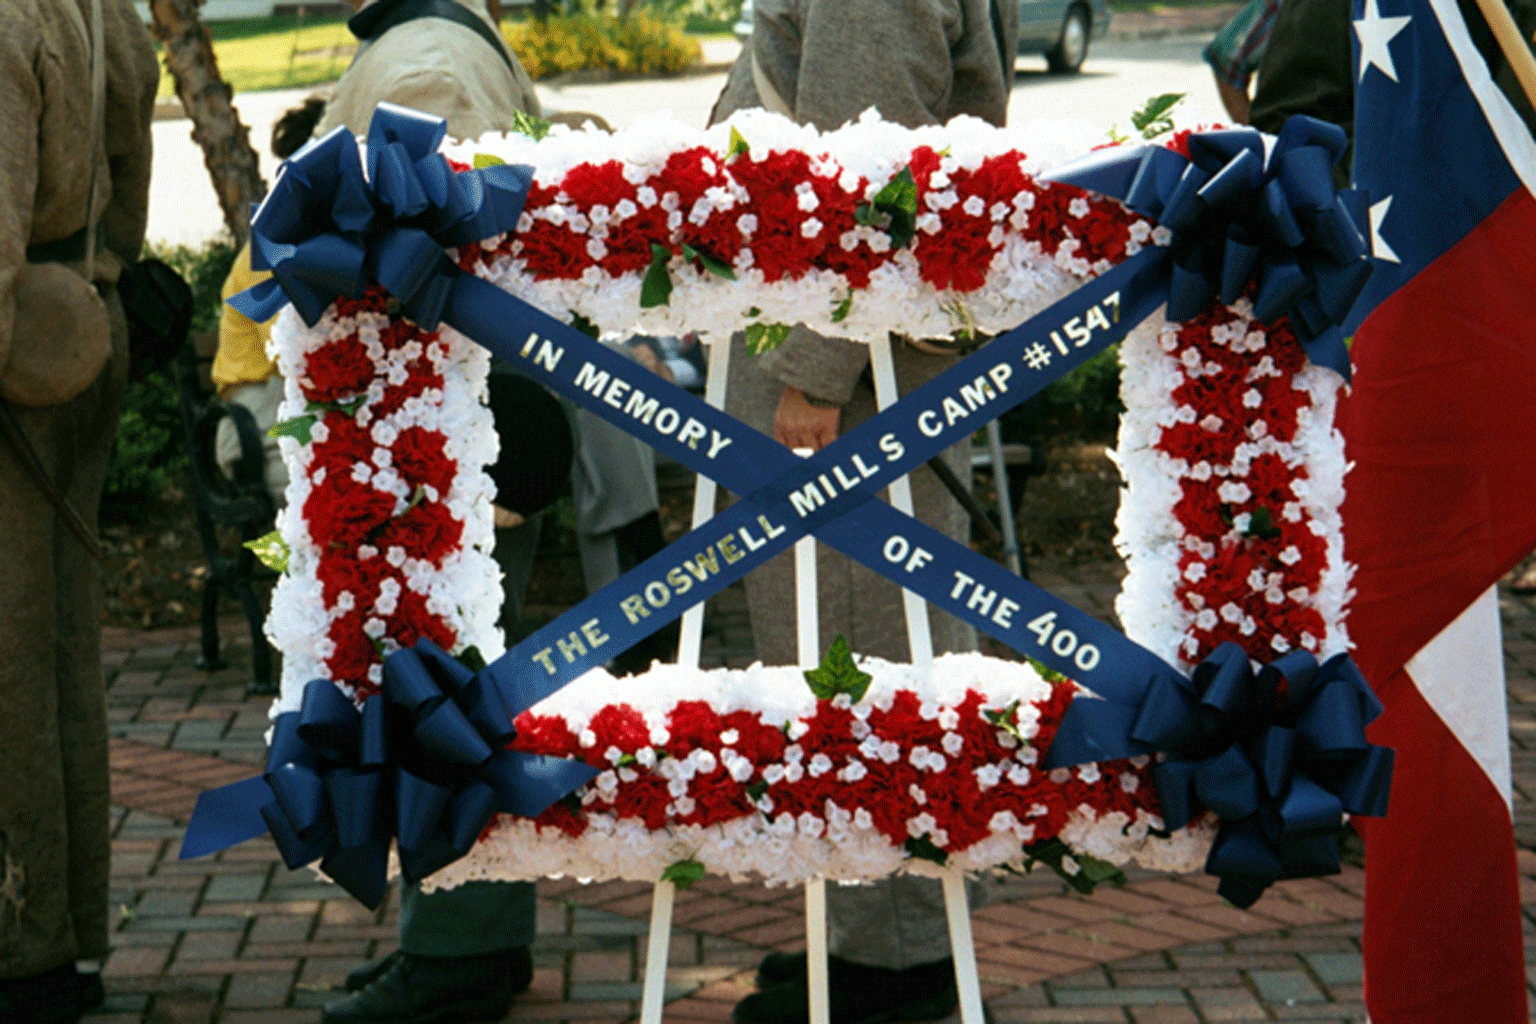 Mill Worker Memorial Service Wreath, "For the 400", Roswell, Georgia July 2001